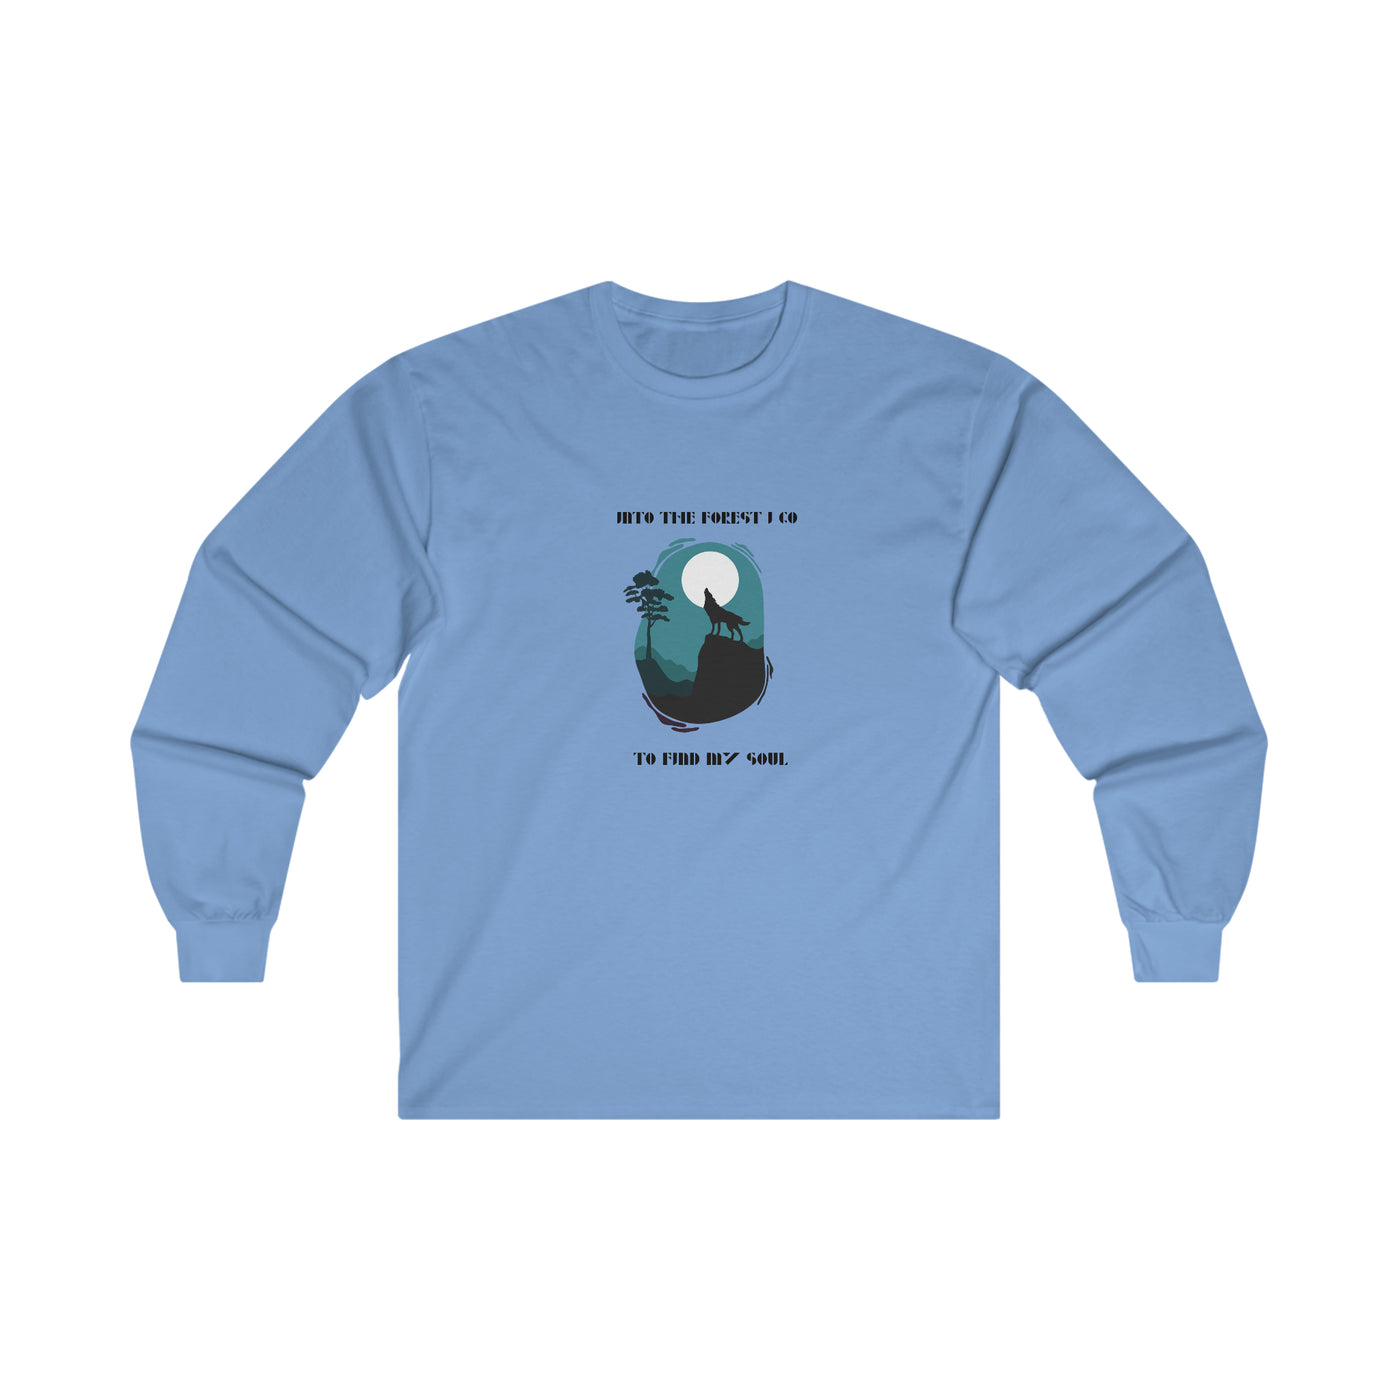 Into the forest I go to find my soul Ultra Cotton Long Sleeve Tee